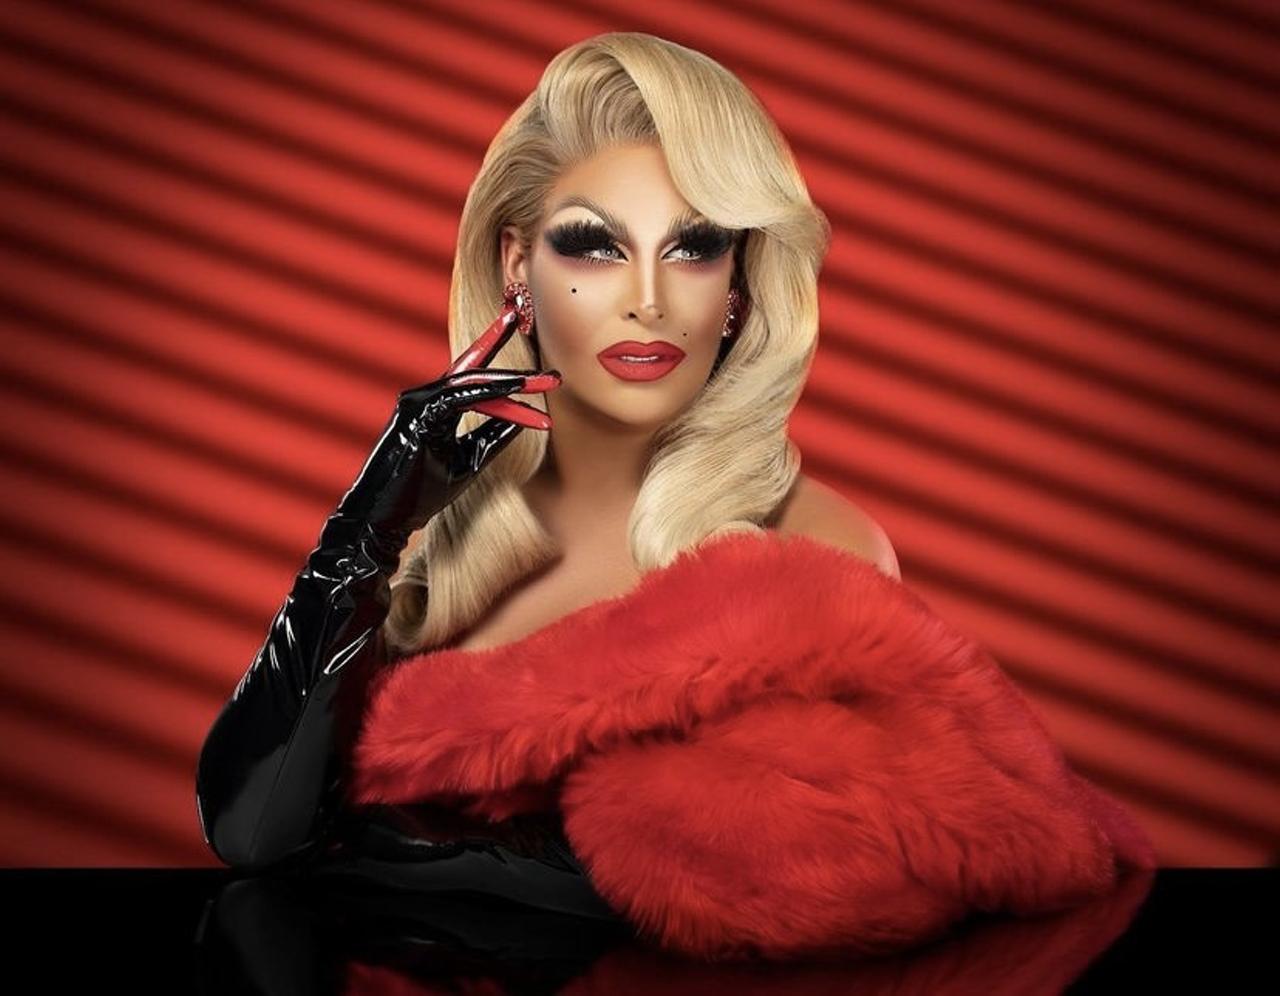   Roxxy Andrews 
A RuPaul’s Drag Race alum, Andrews’ Instagram is full of promos for their upcoming events and fun makeup looks. Their iconic look of red lipstick and bright blonde hair will make your feed more glamorous.
